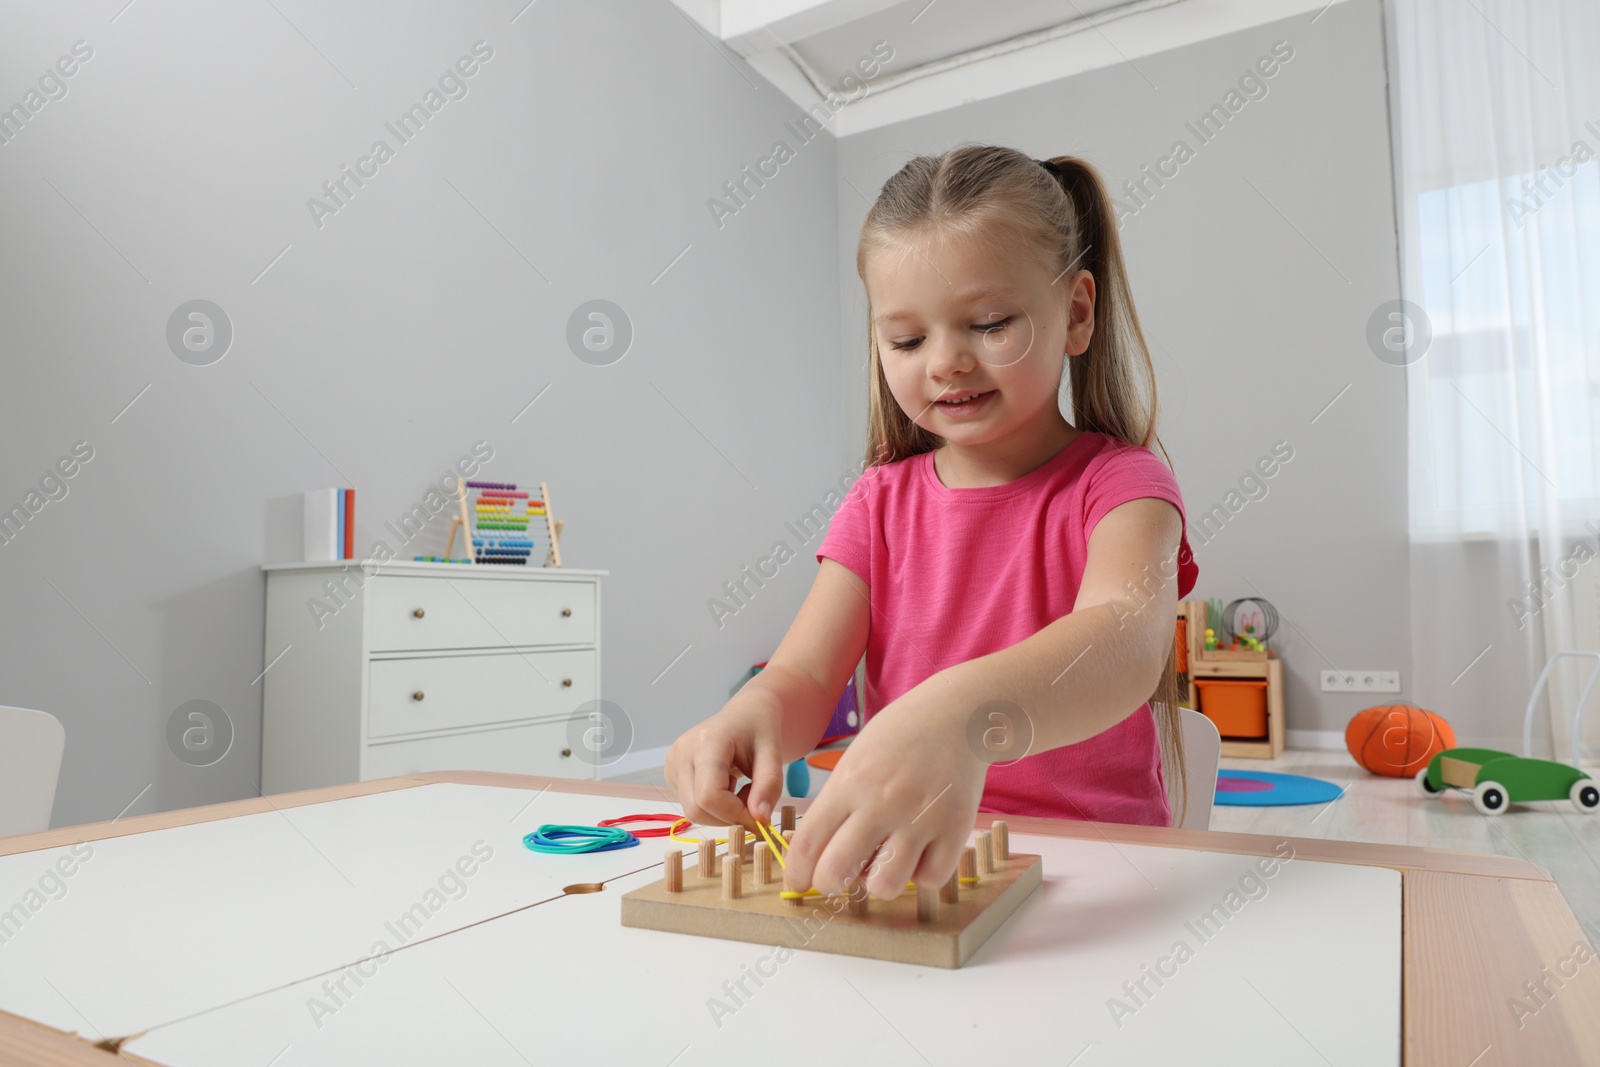 Photo of Motor skills development. Girl playing with geoboard and rubber bands at white table in kindergarten. Space for text